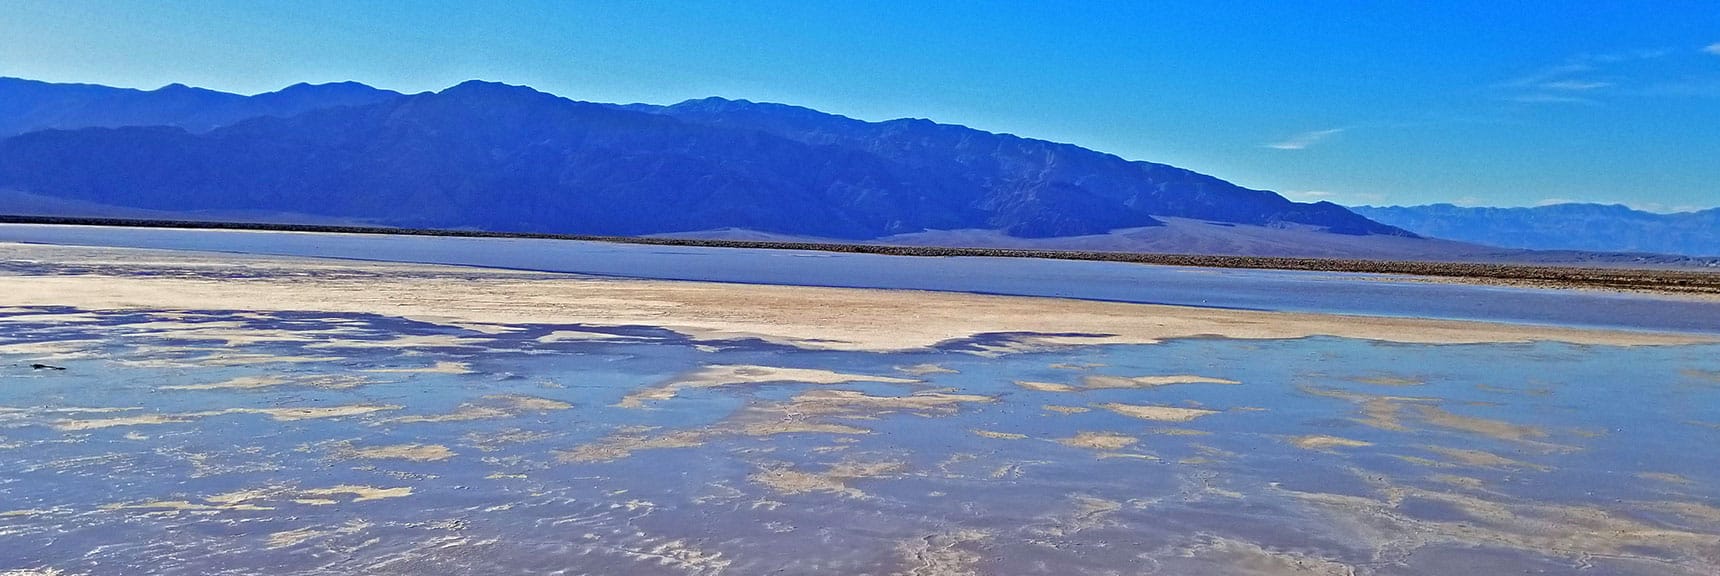 Approaching the Shore of the Temporary Shallow Lake Manly in Death Valley. | Return of Lake Manly (Lake in Death Valley) | Death Valley National Park, California